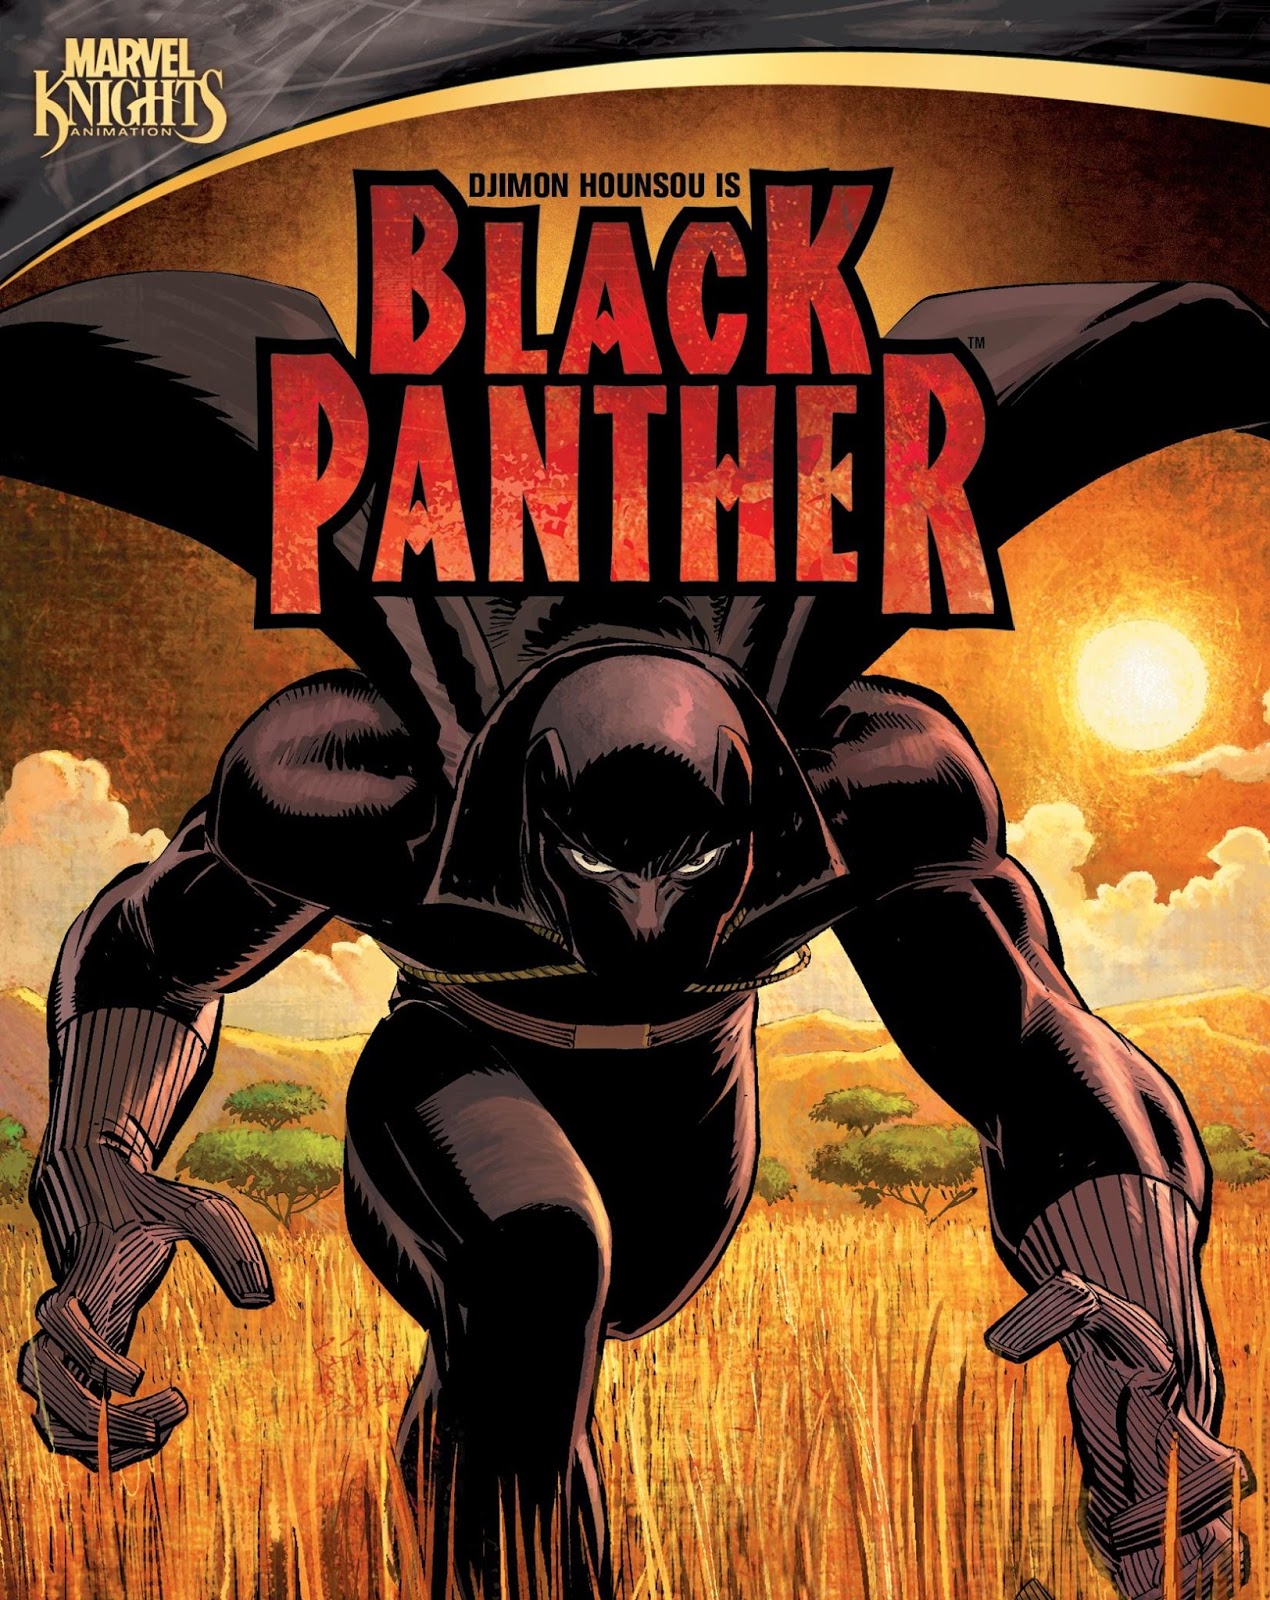 Marvel Knights Animation – Black Panther